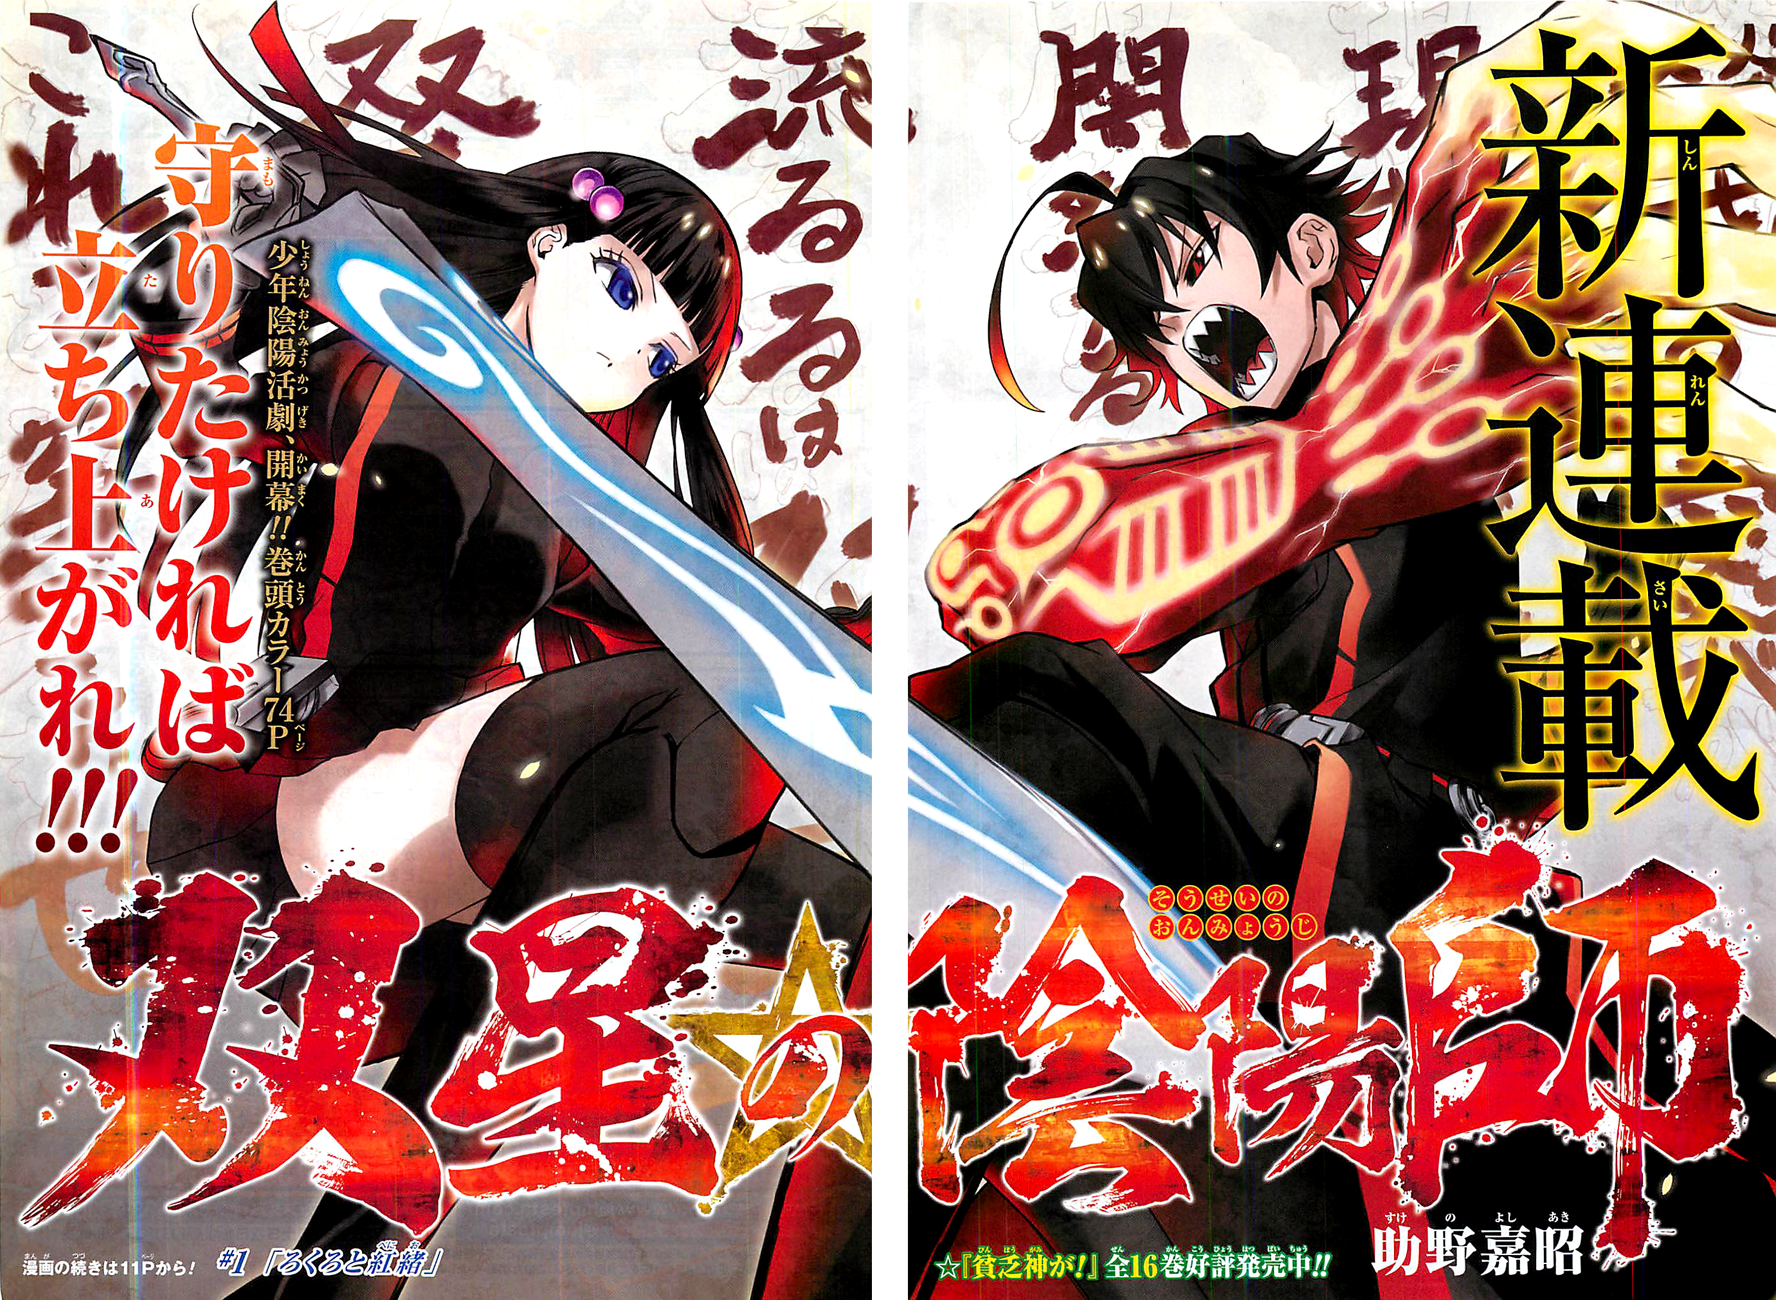 Twin Star Exorcists #9